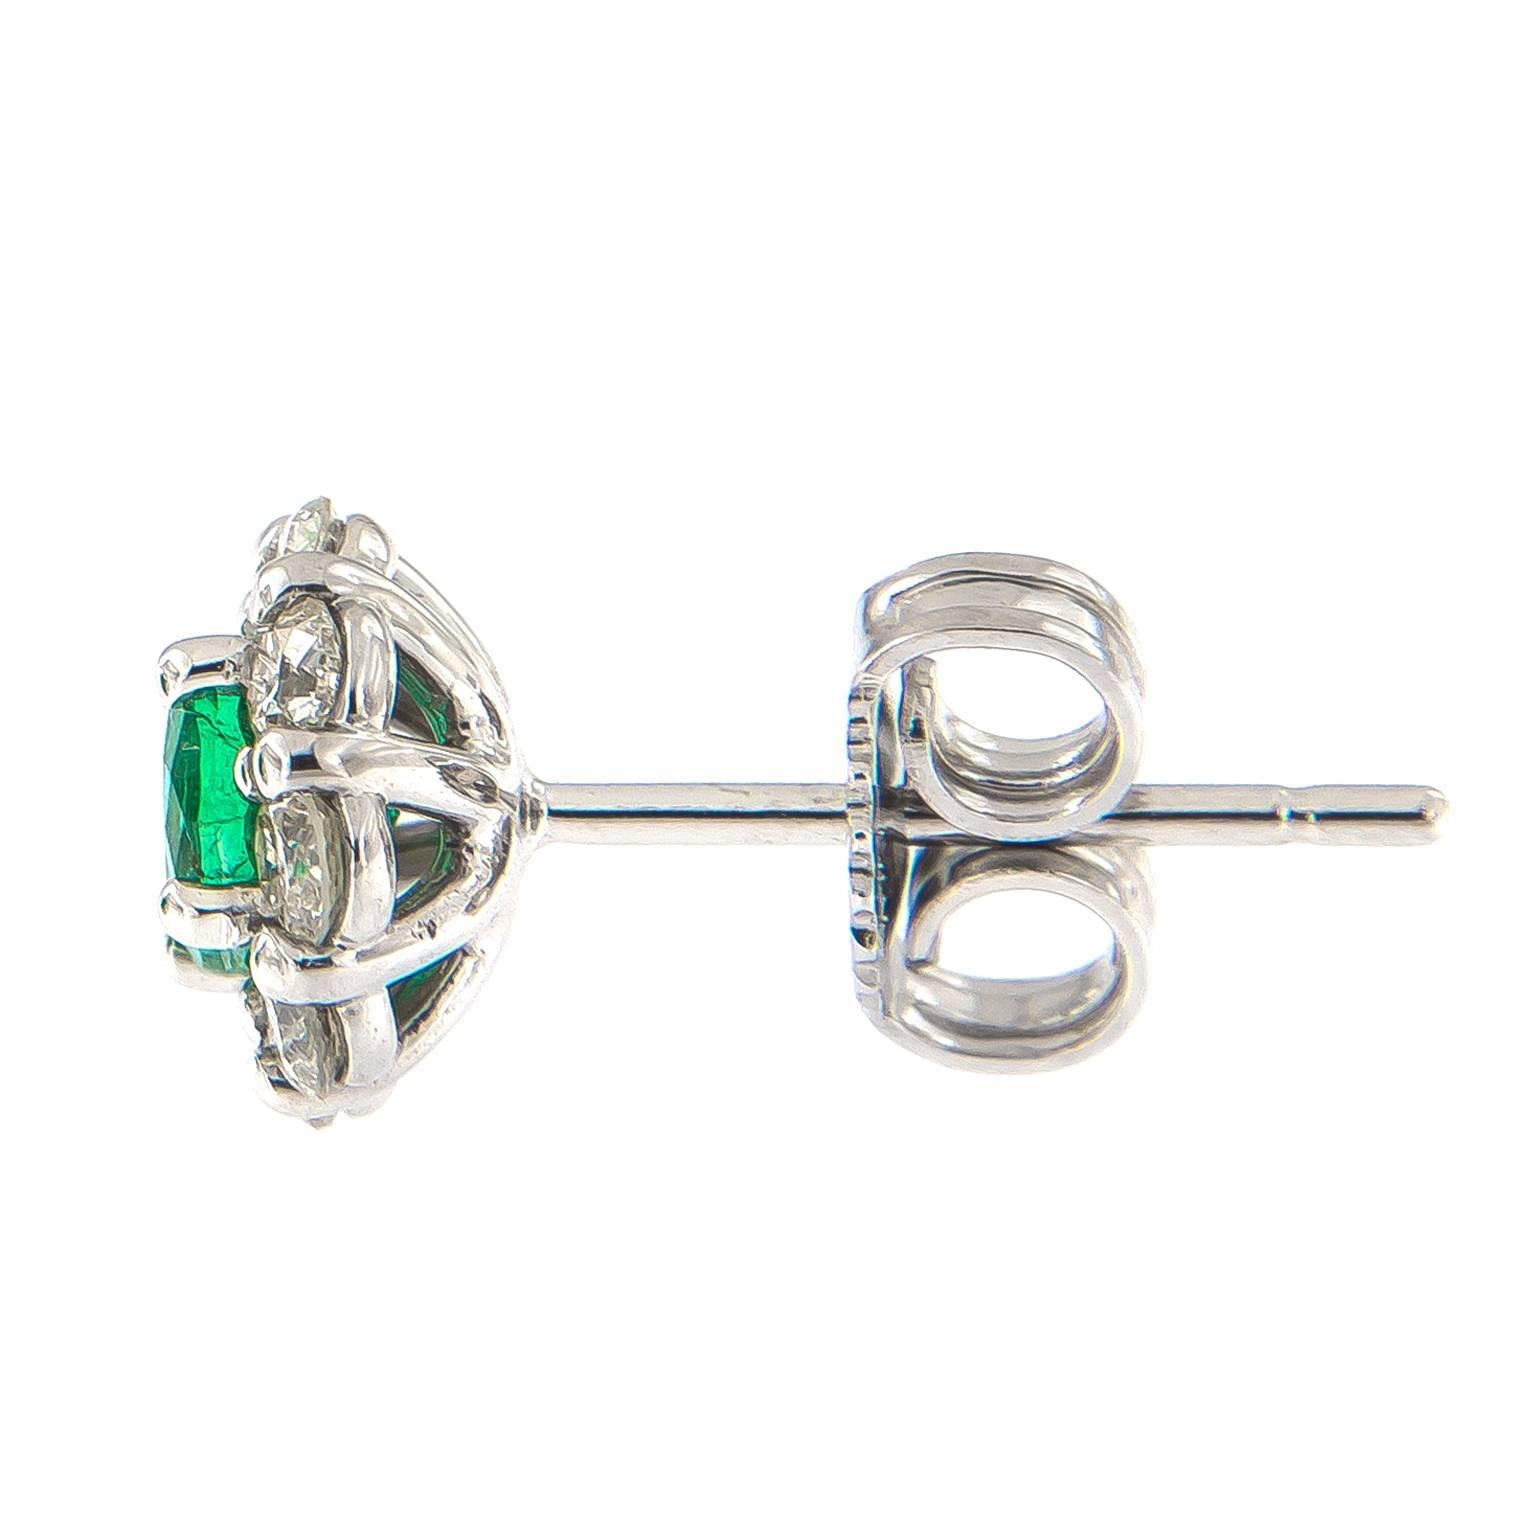 These elegant stud earrings in 14k white gold feature round-shape emeralds and are nestled in sparkling halos of white diamonds. Green is the most restful color to the eye, and these tranquil earrings are sure to please!

Emeralds 0.55 cttw
RBC